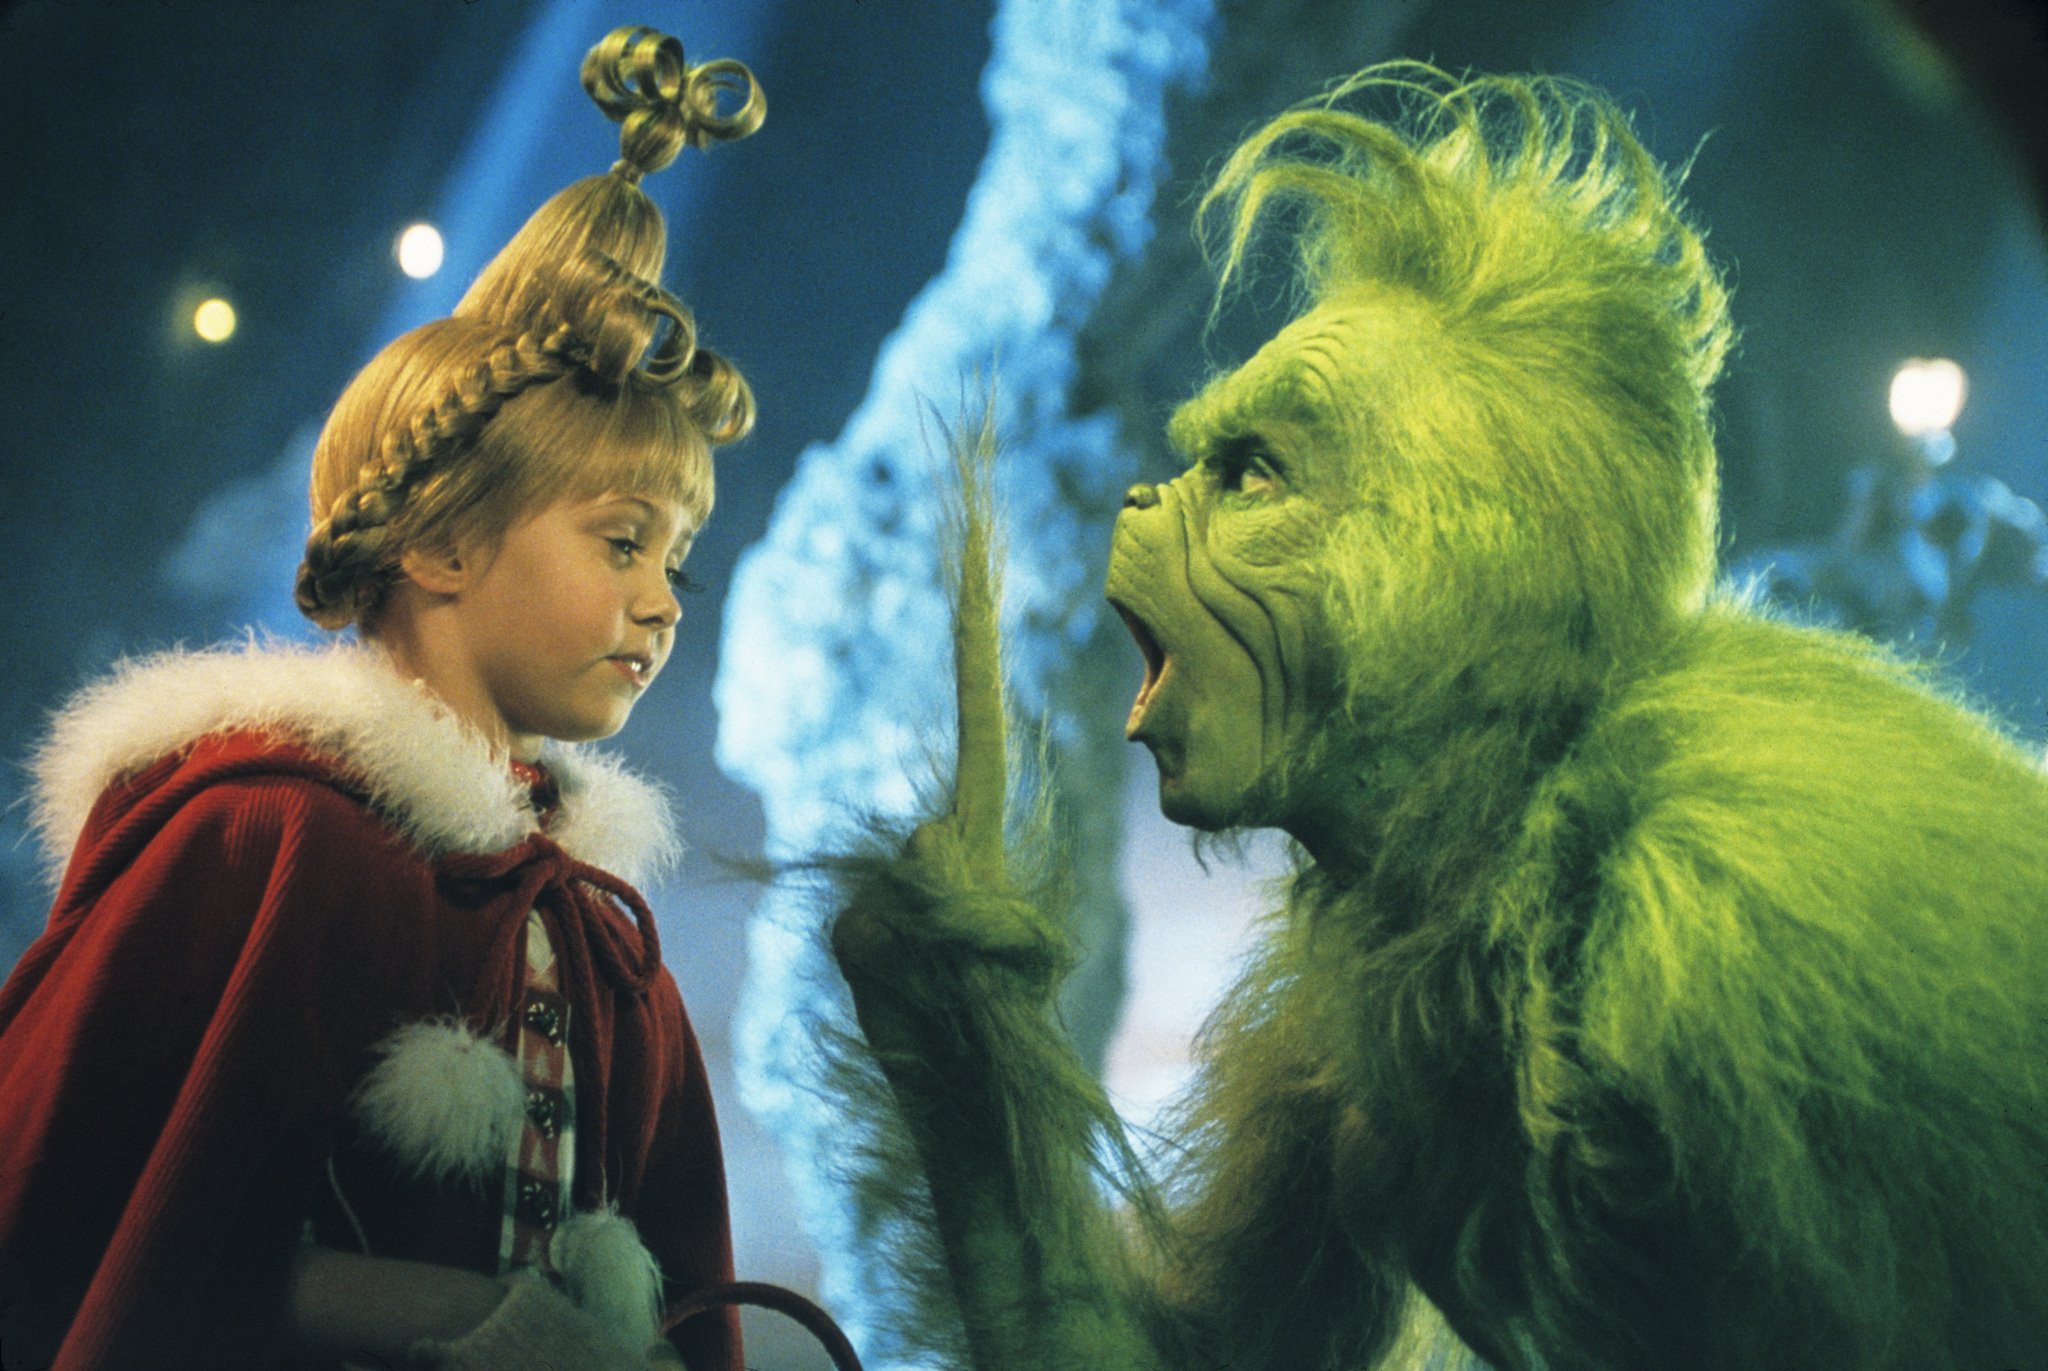 How the Grinch Stole Christmas (Crave)